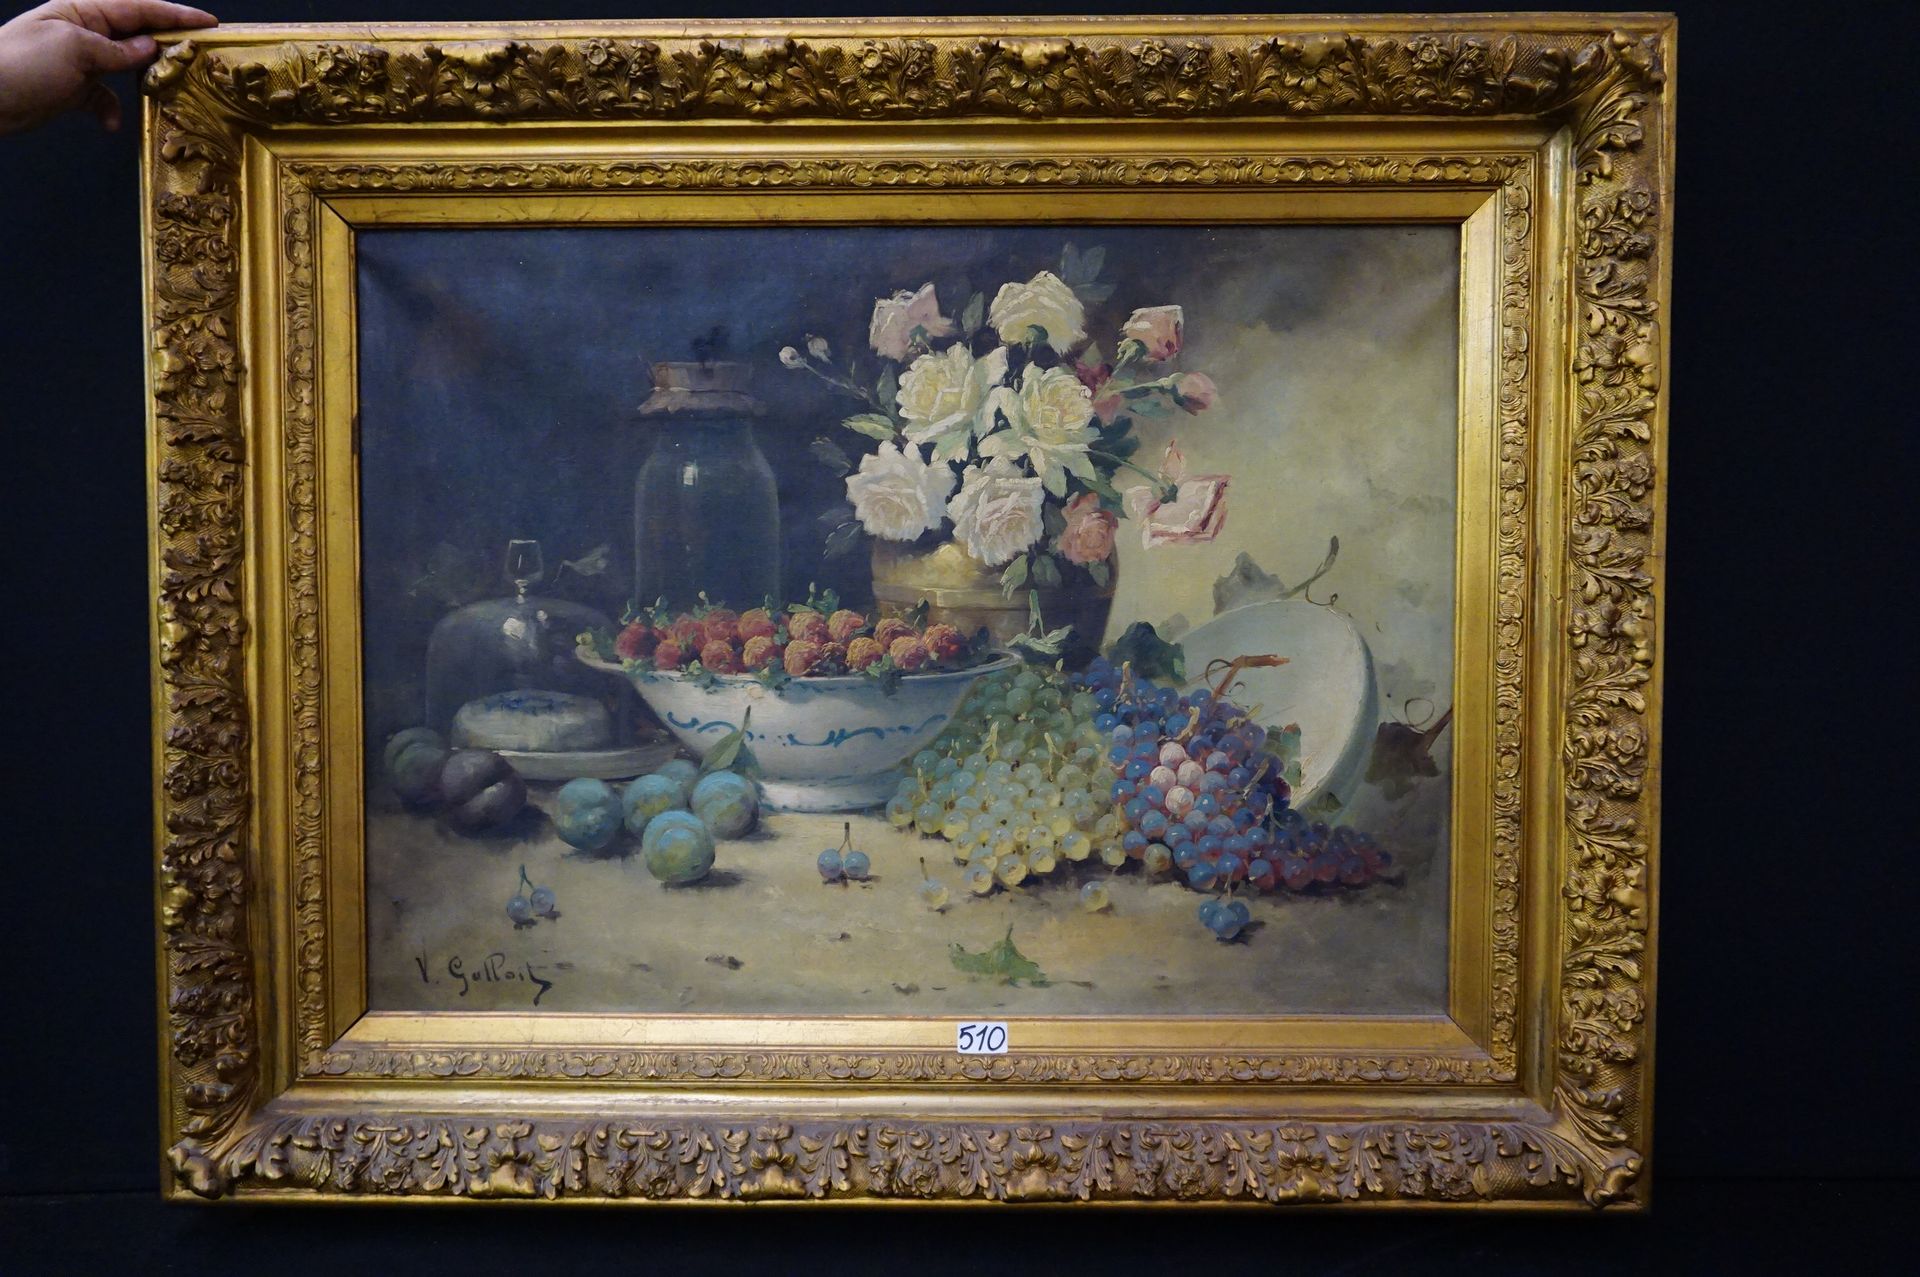 V. GALLOIT "Still life with roses and fruit" - Oil on canvas - Signed - Beautifu&hellip;